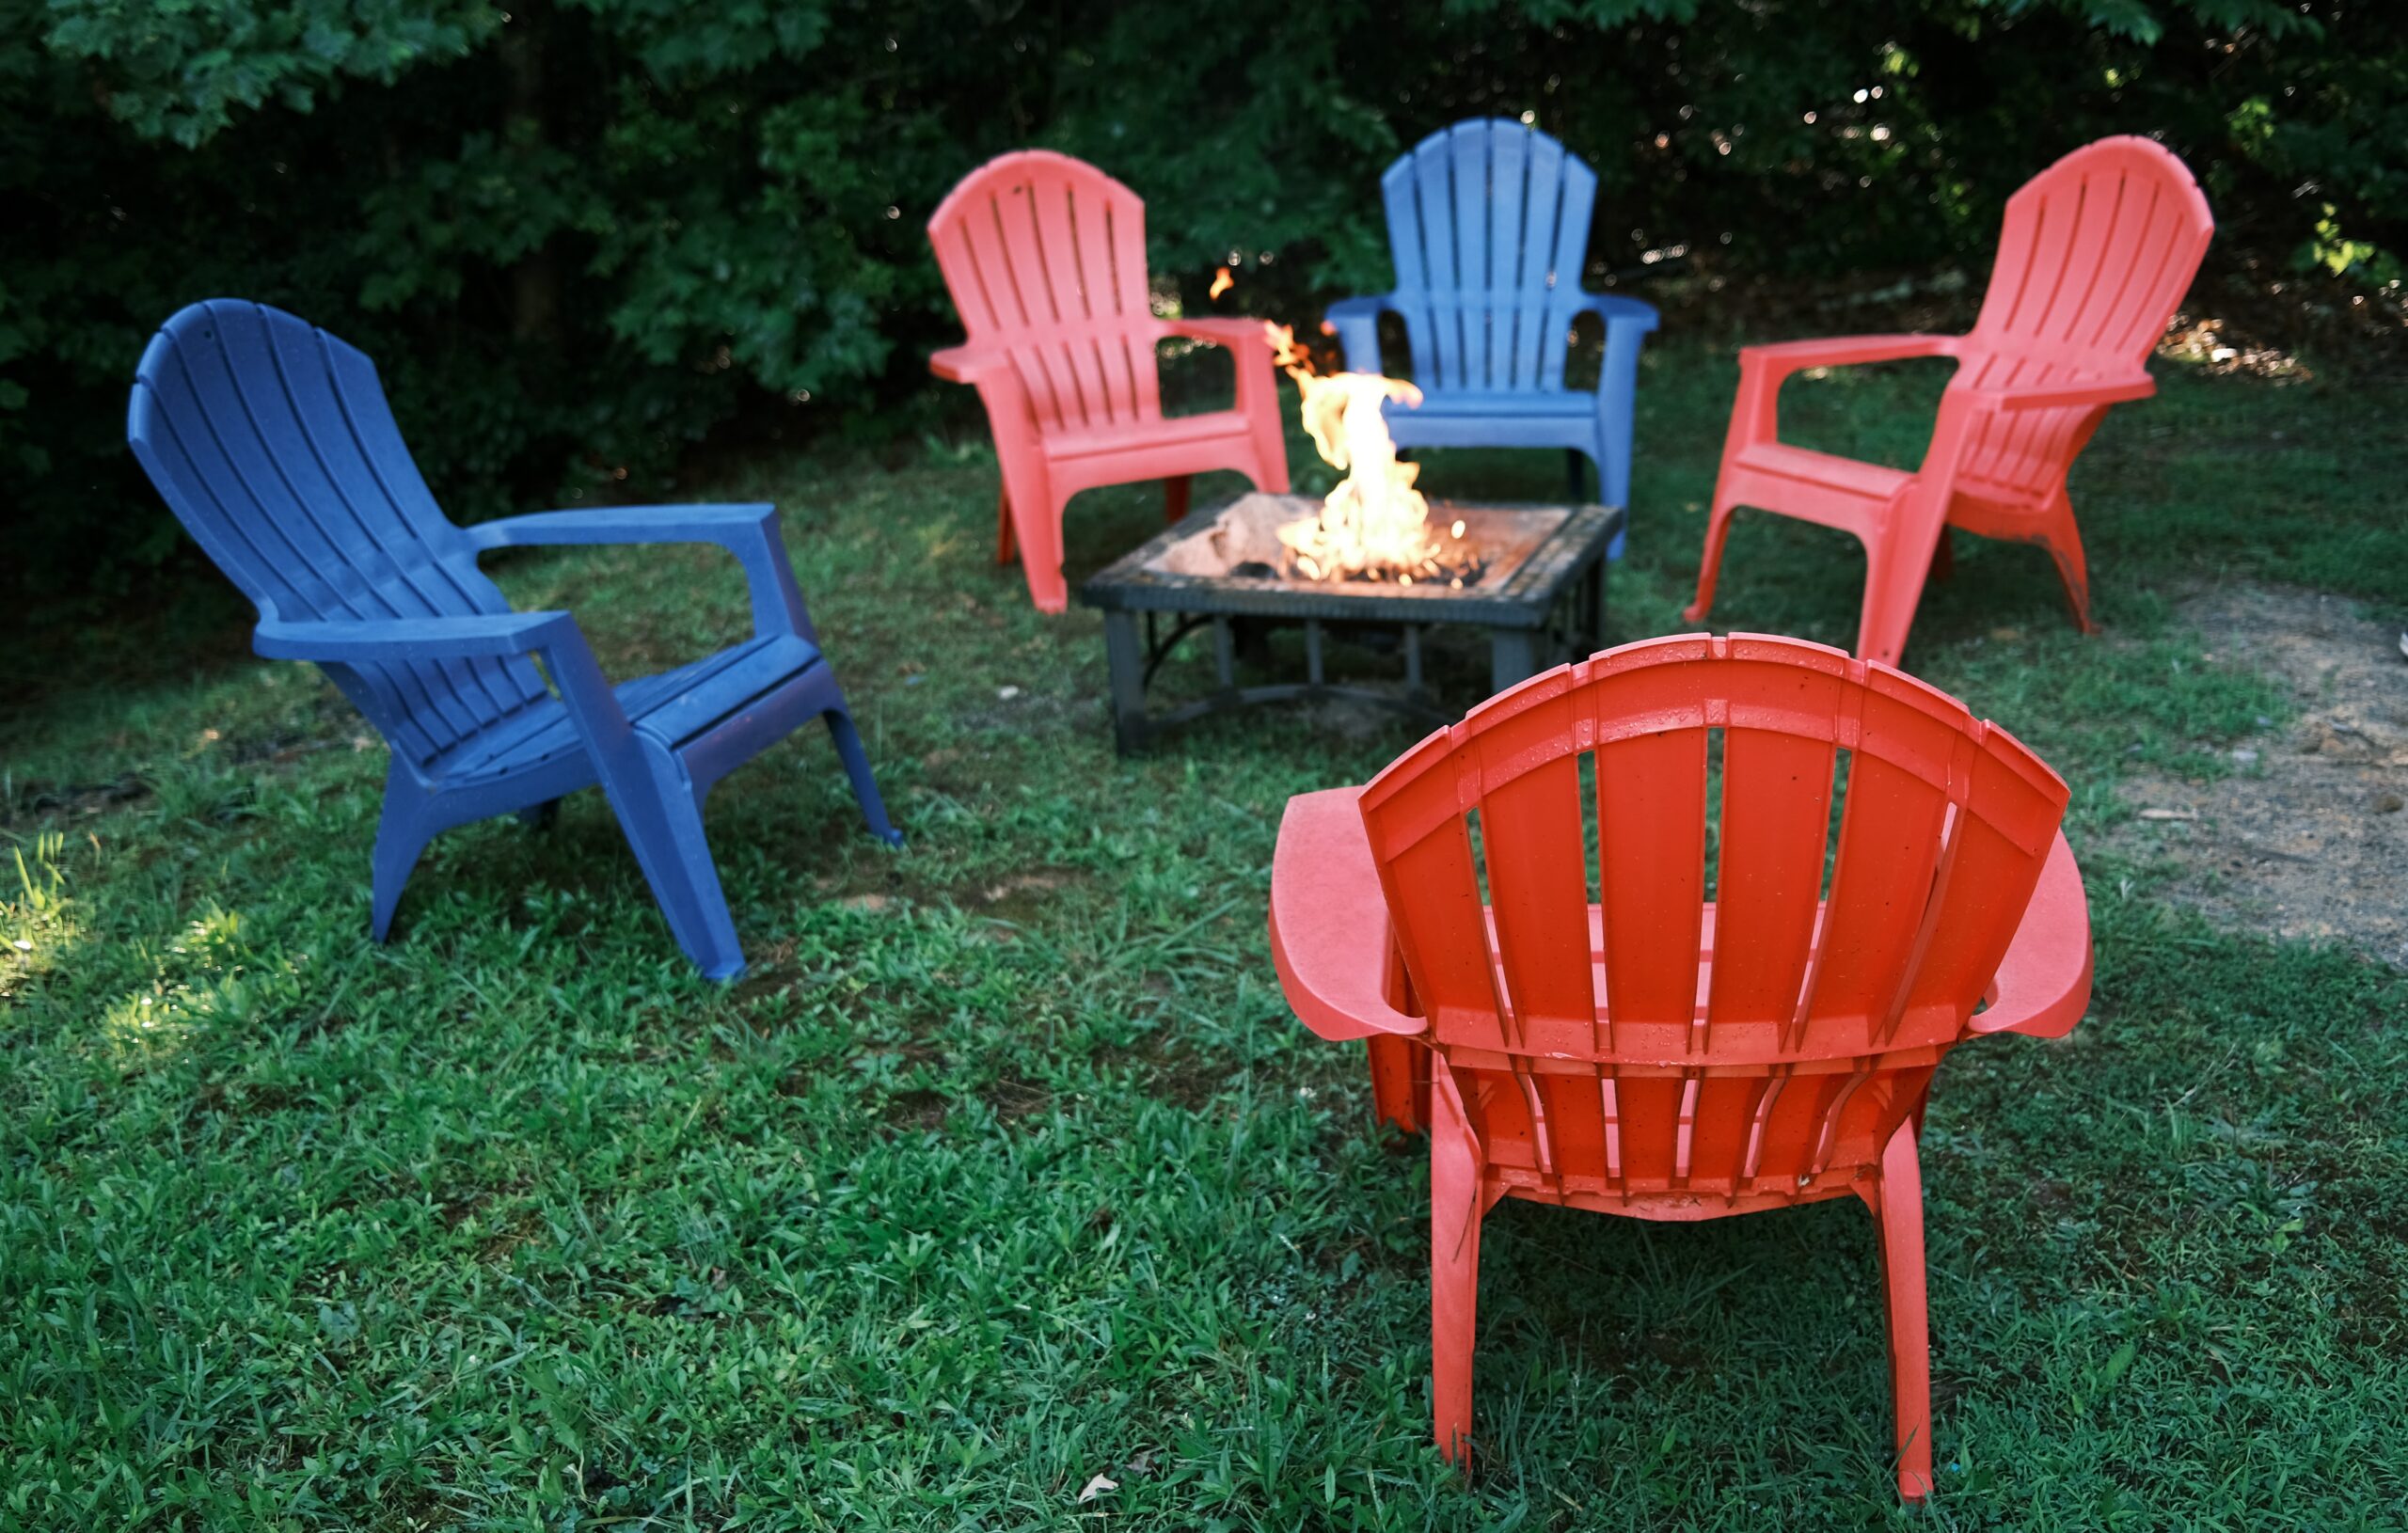 Image of a backyard with blue and red patio chairs and fireplace located in the middle